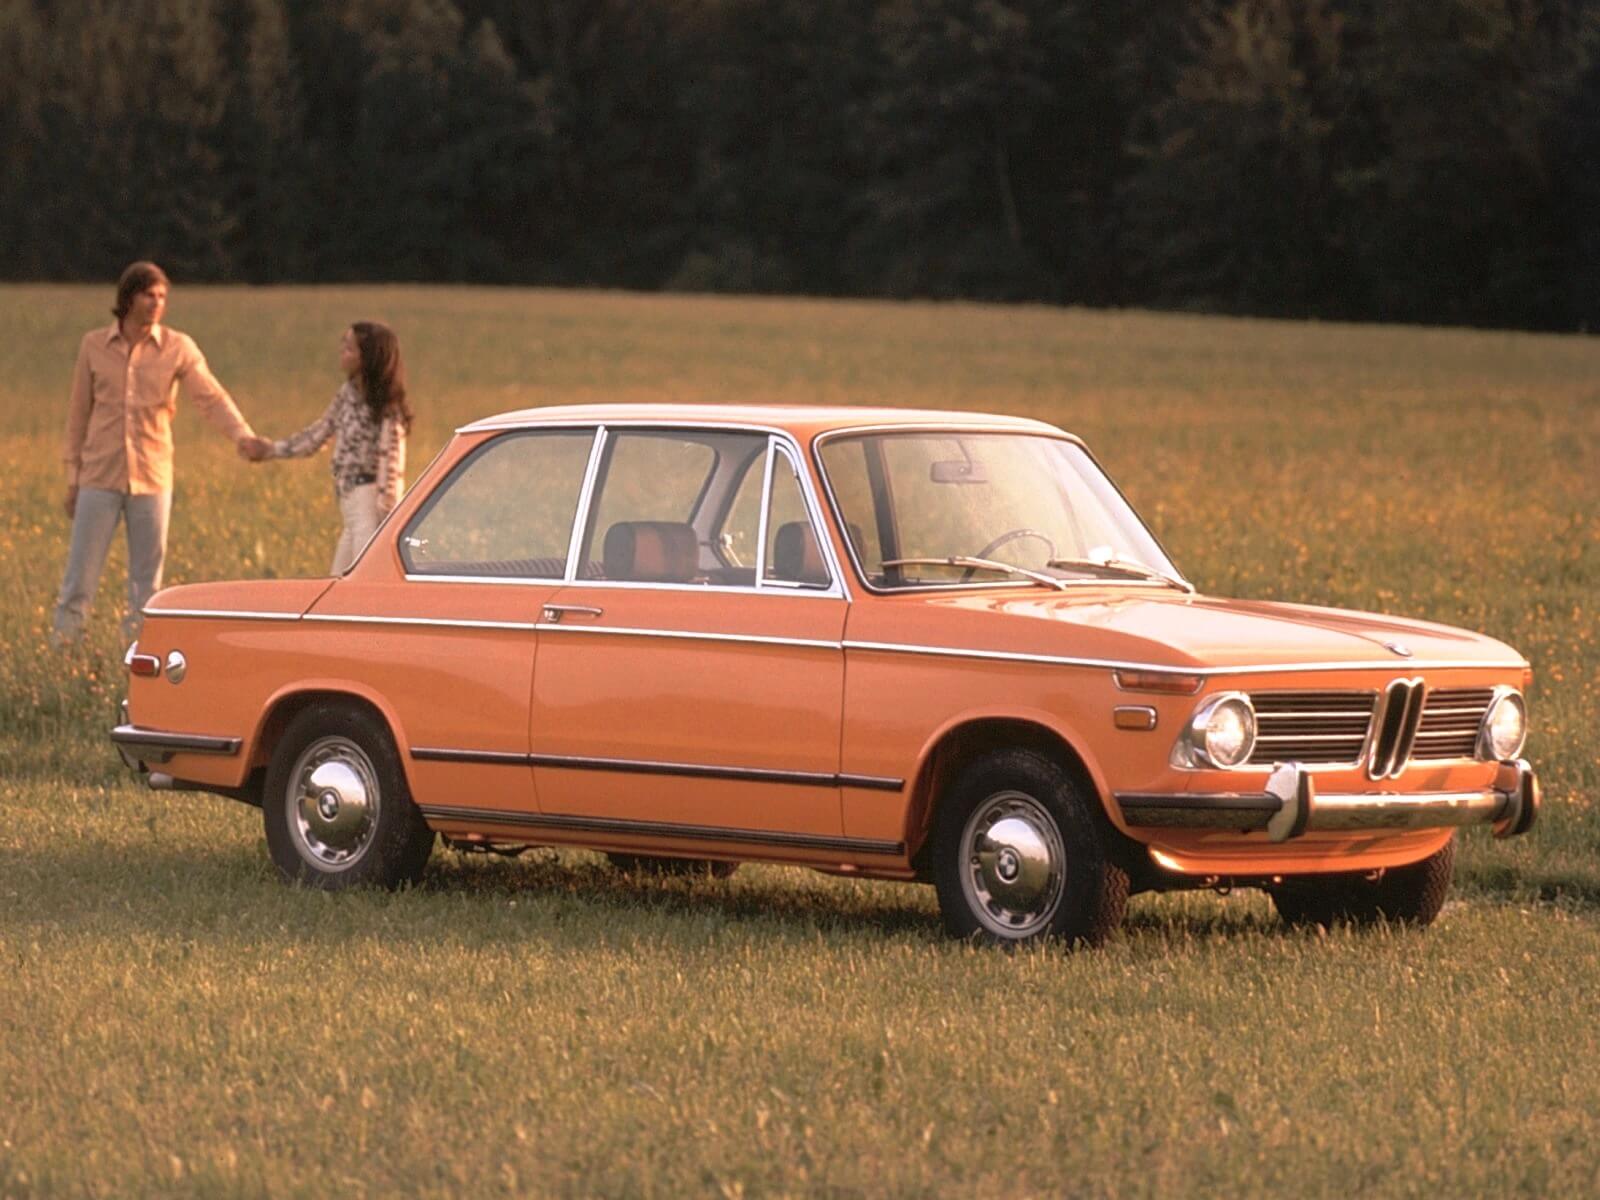 A BMW 2002 parked in an idyllic country field